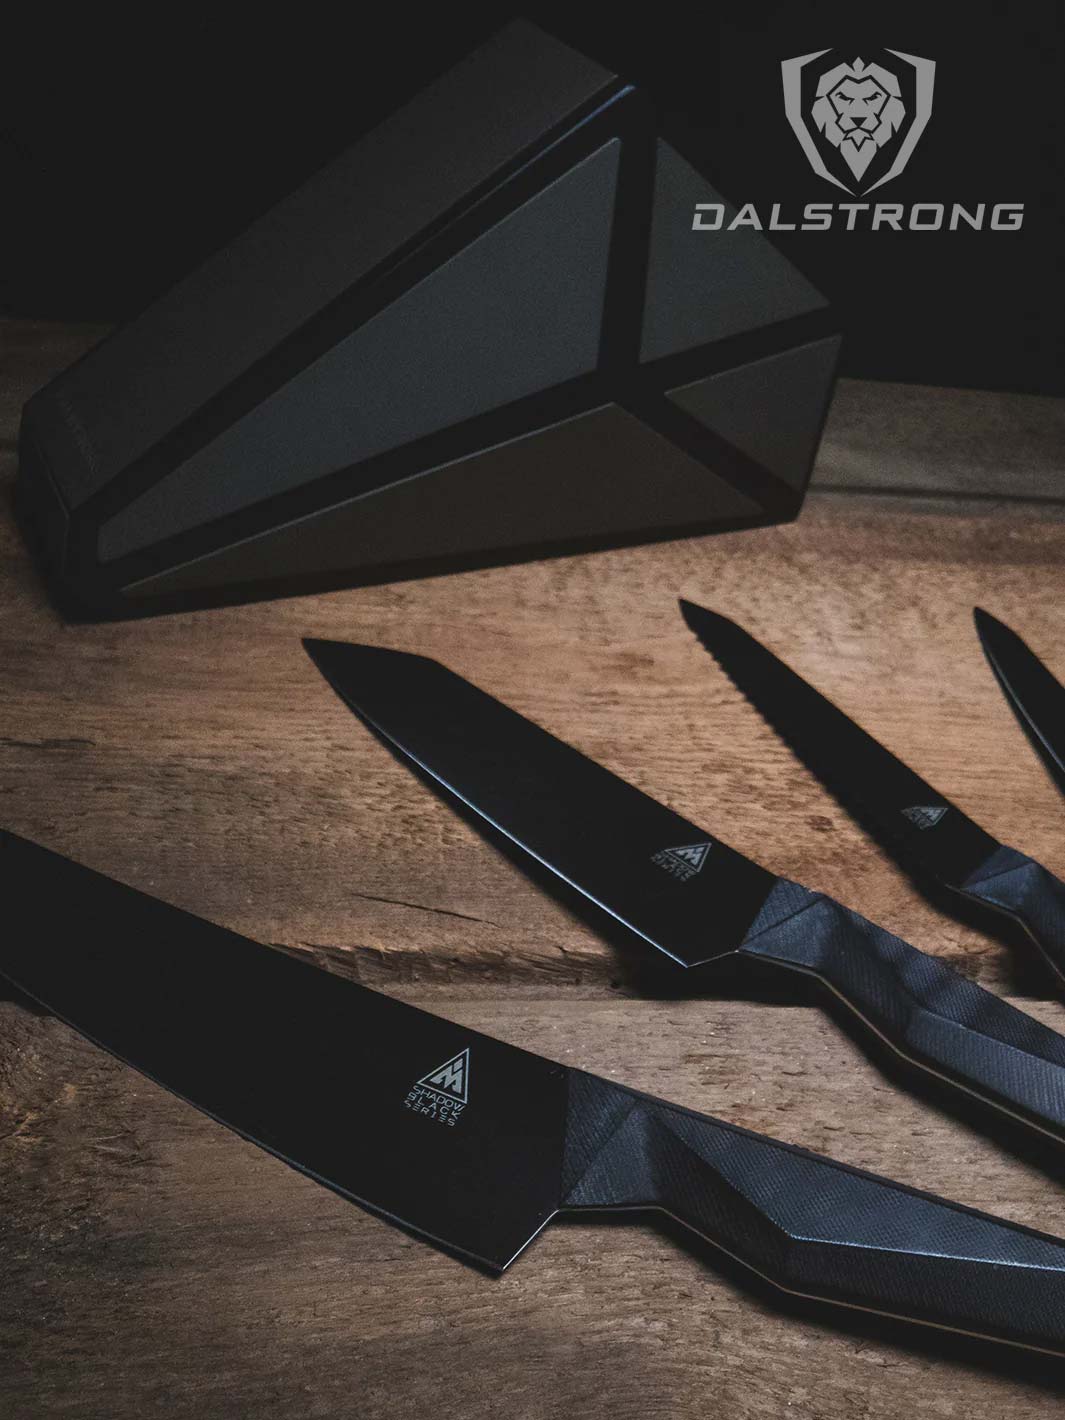 5 Piece Block Set | NSF Certified | Shadow Black Series | Dalstrong ©